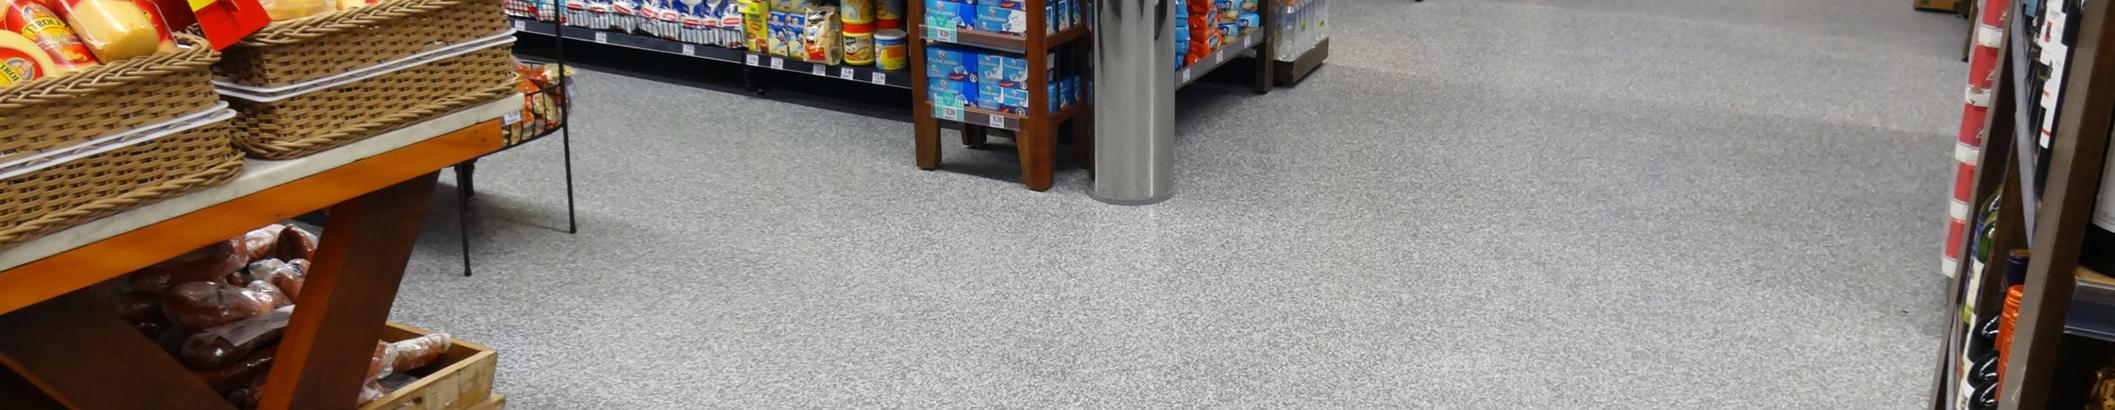 grocery store polyaspartic flooring